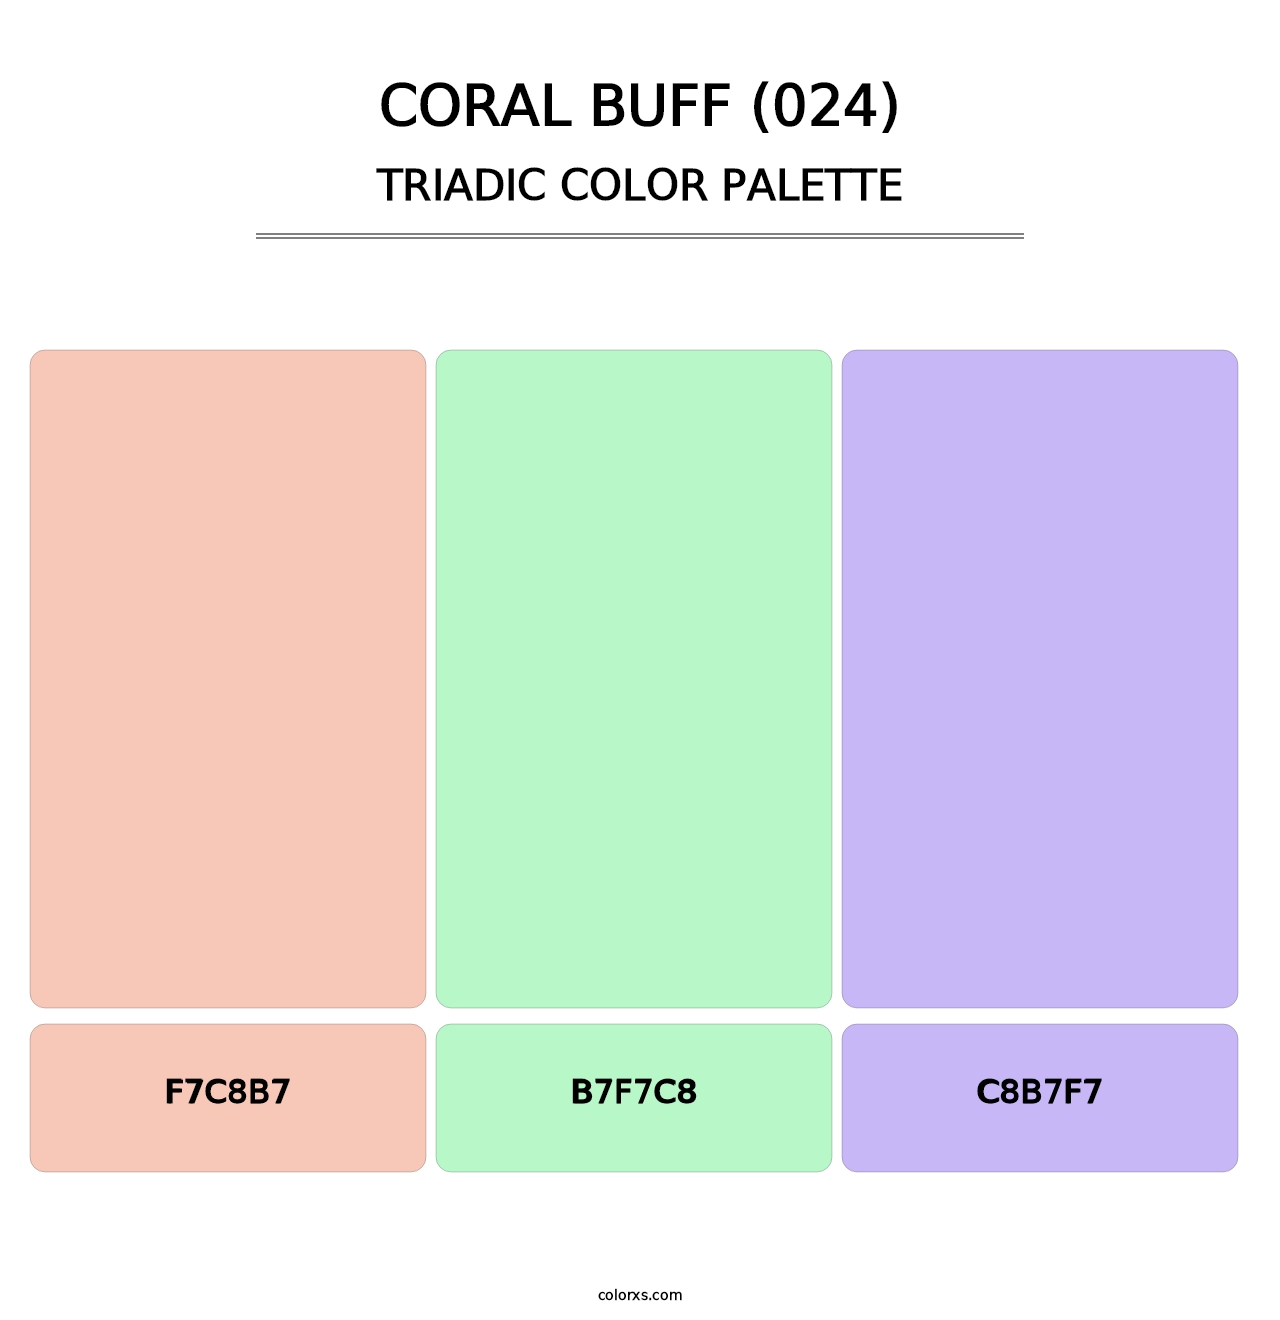 Coral Buff (024) - Triadic Color Palette